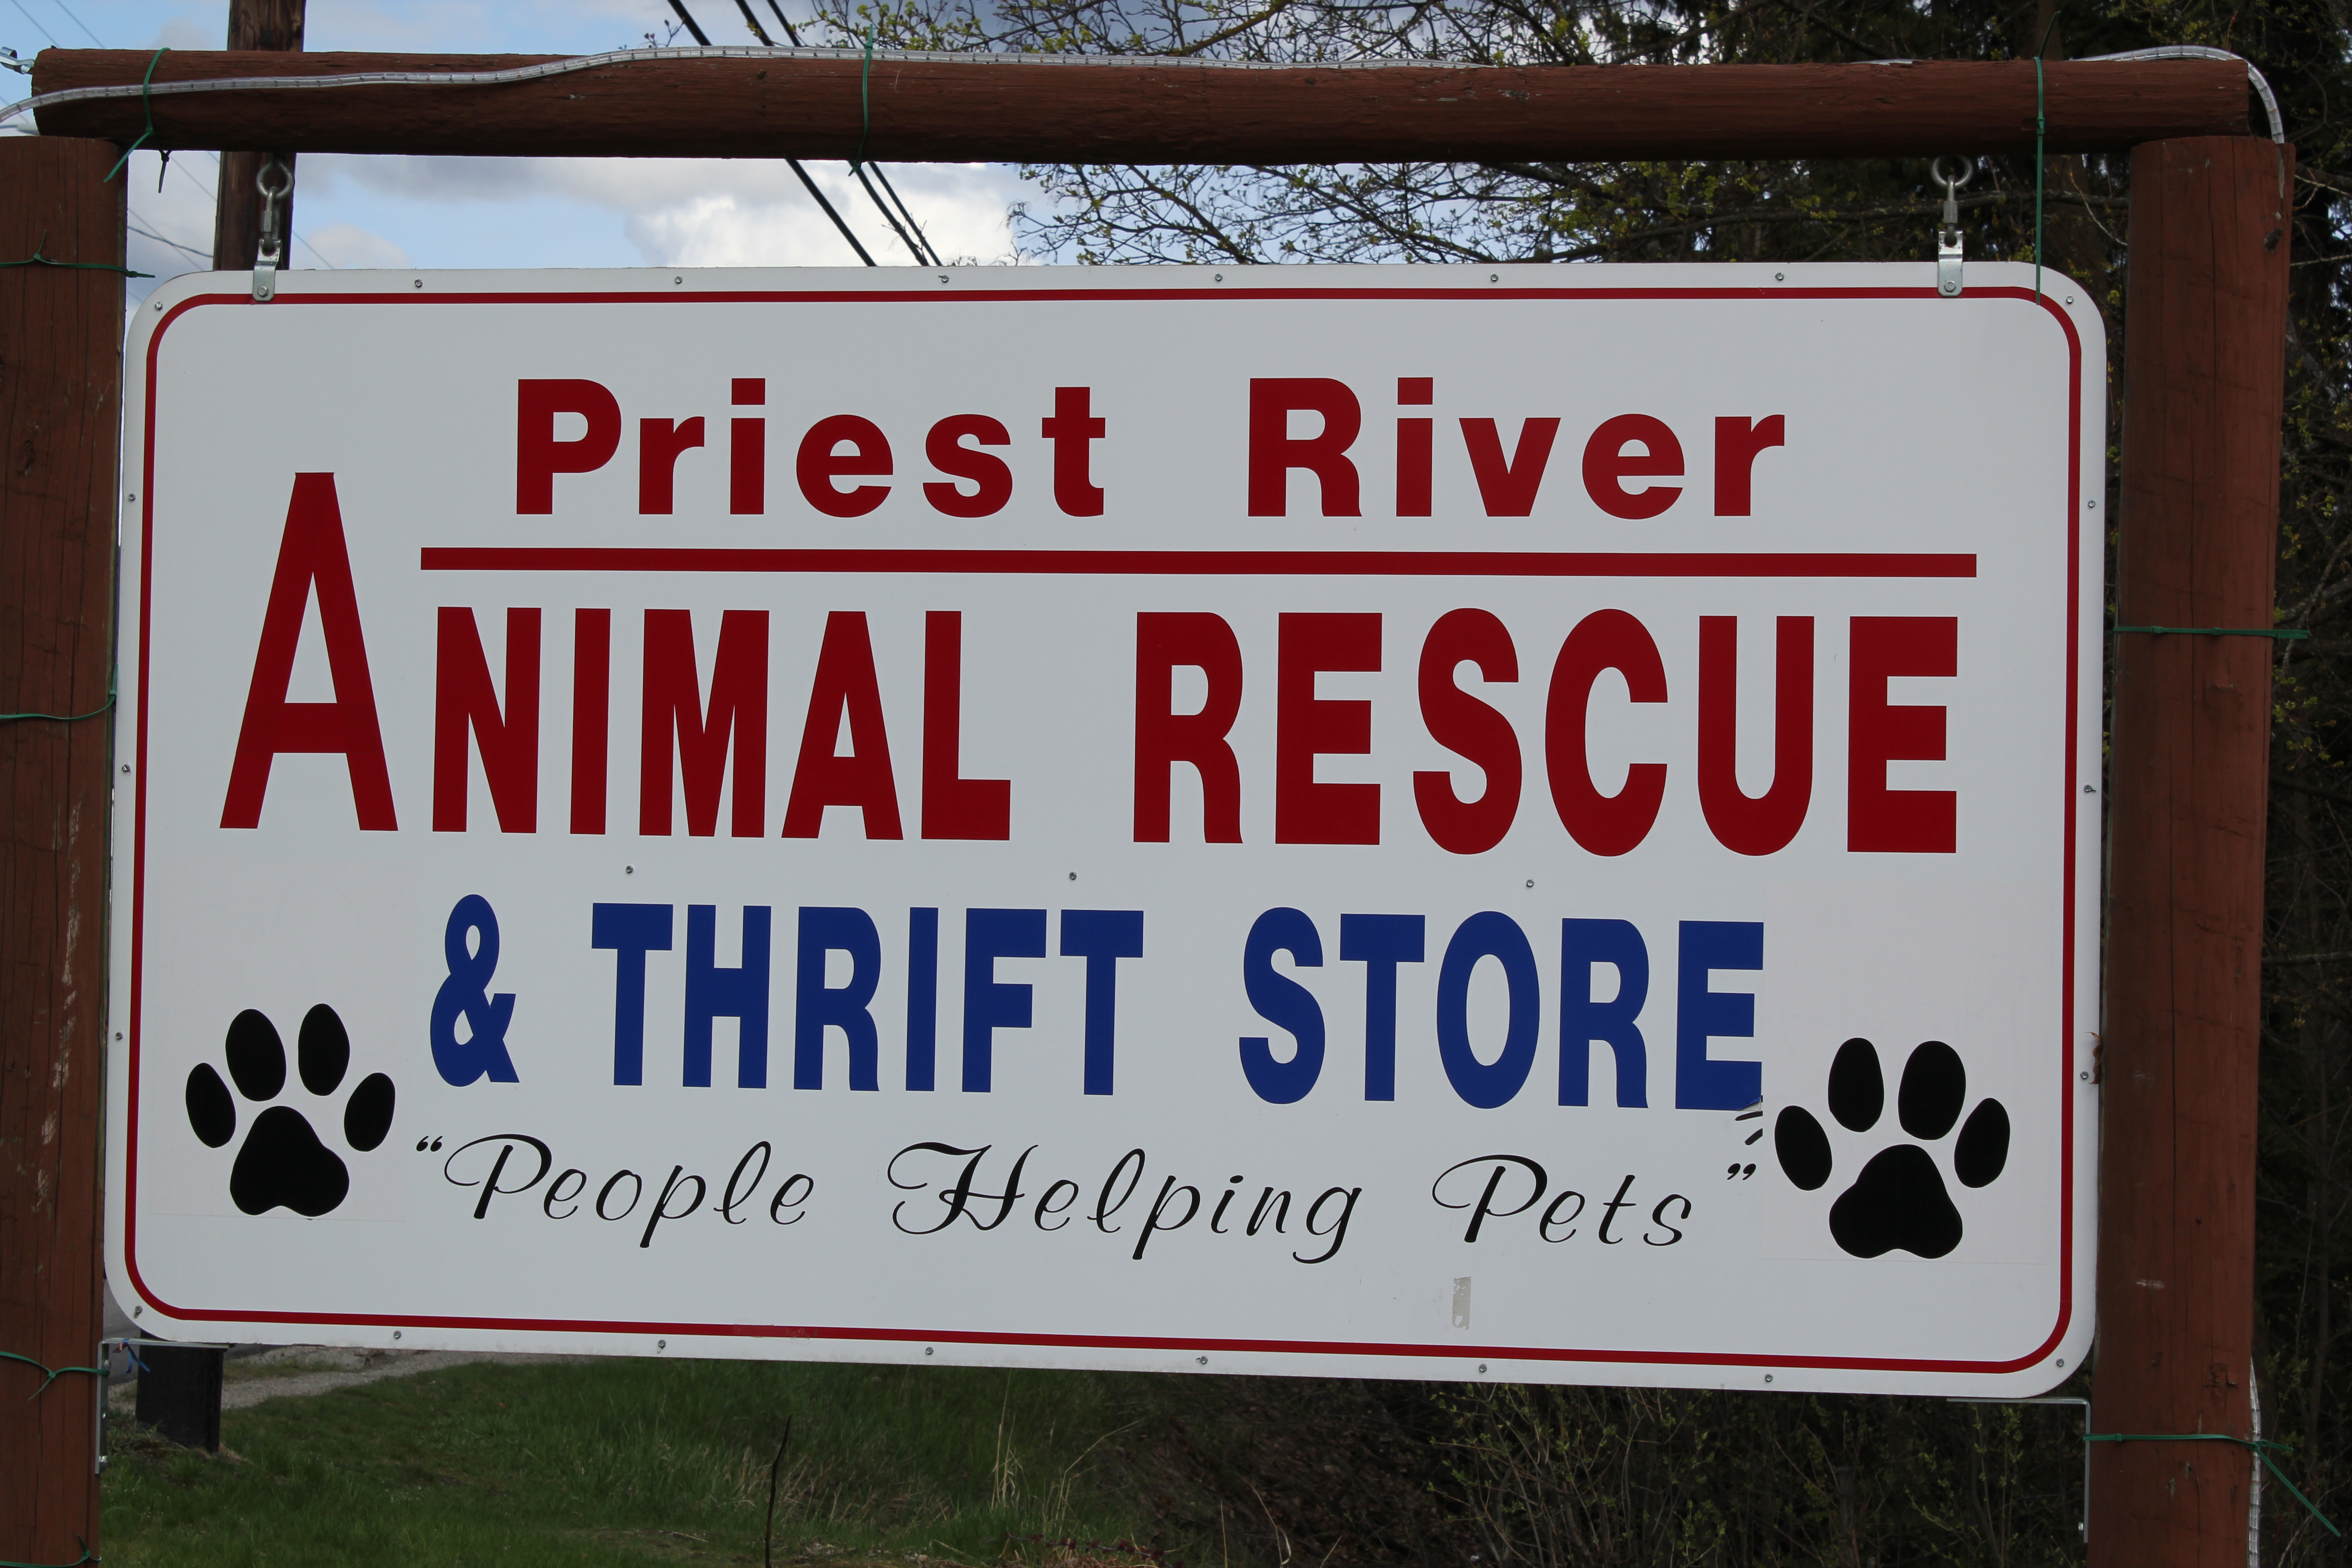 Priest River Animal Rescue & Critters Thrift Store | 5538 U S 2, Priest River, ID, 83856 | +1 (208) 448-0699